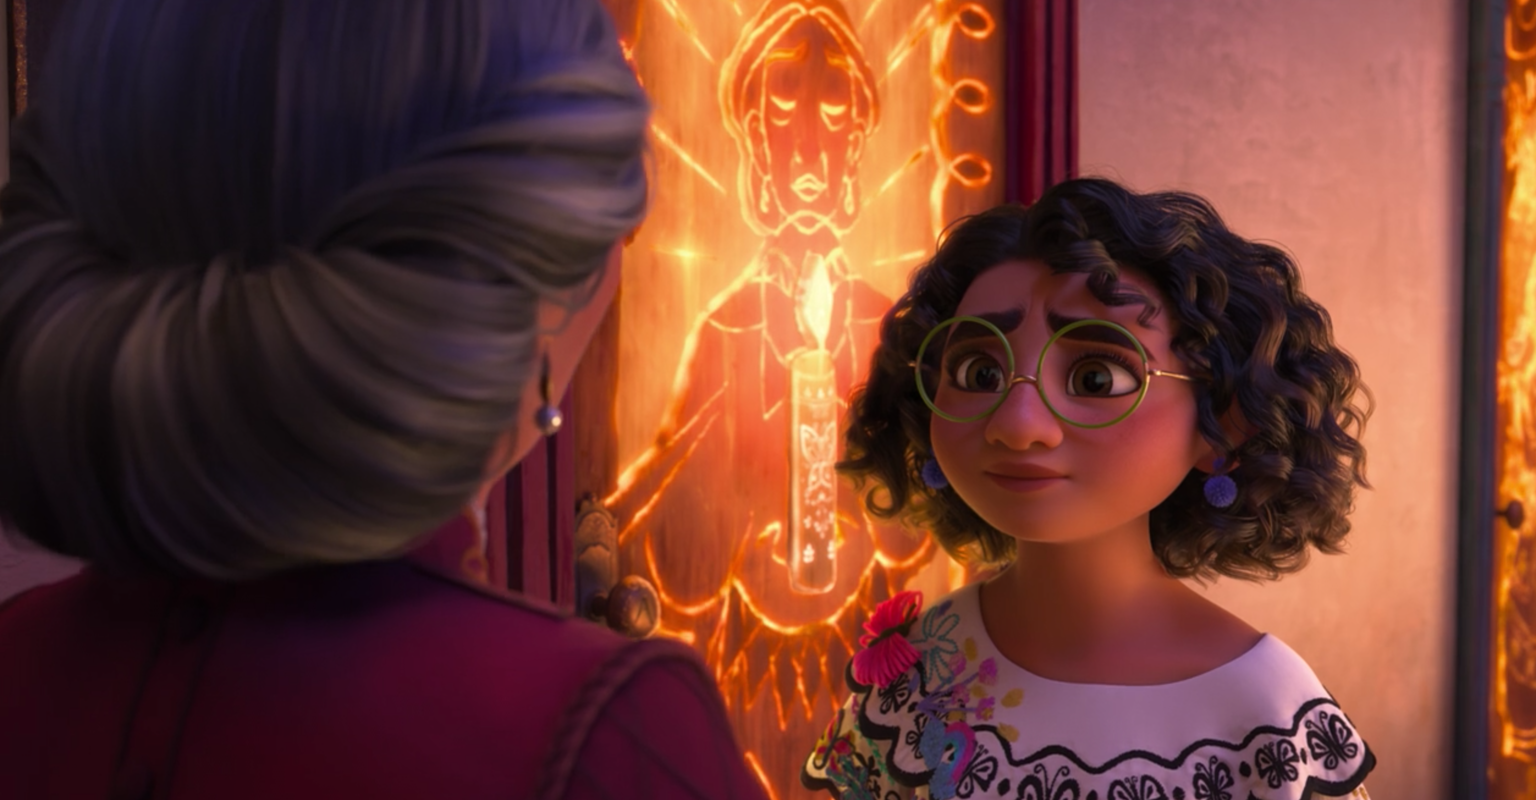 Disney's 'Encanto' has a simple but powerful message: It's not what you do,  but who you are that counts